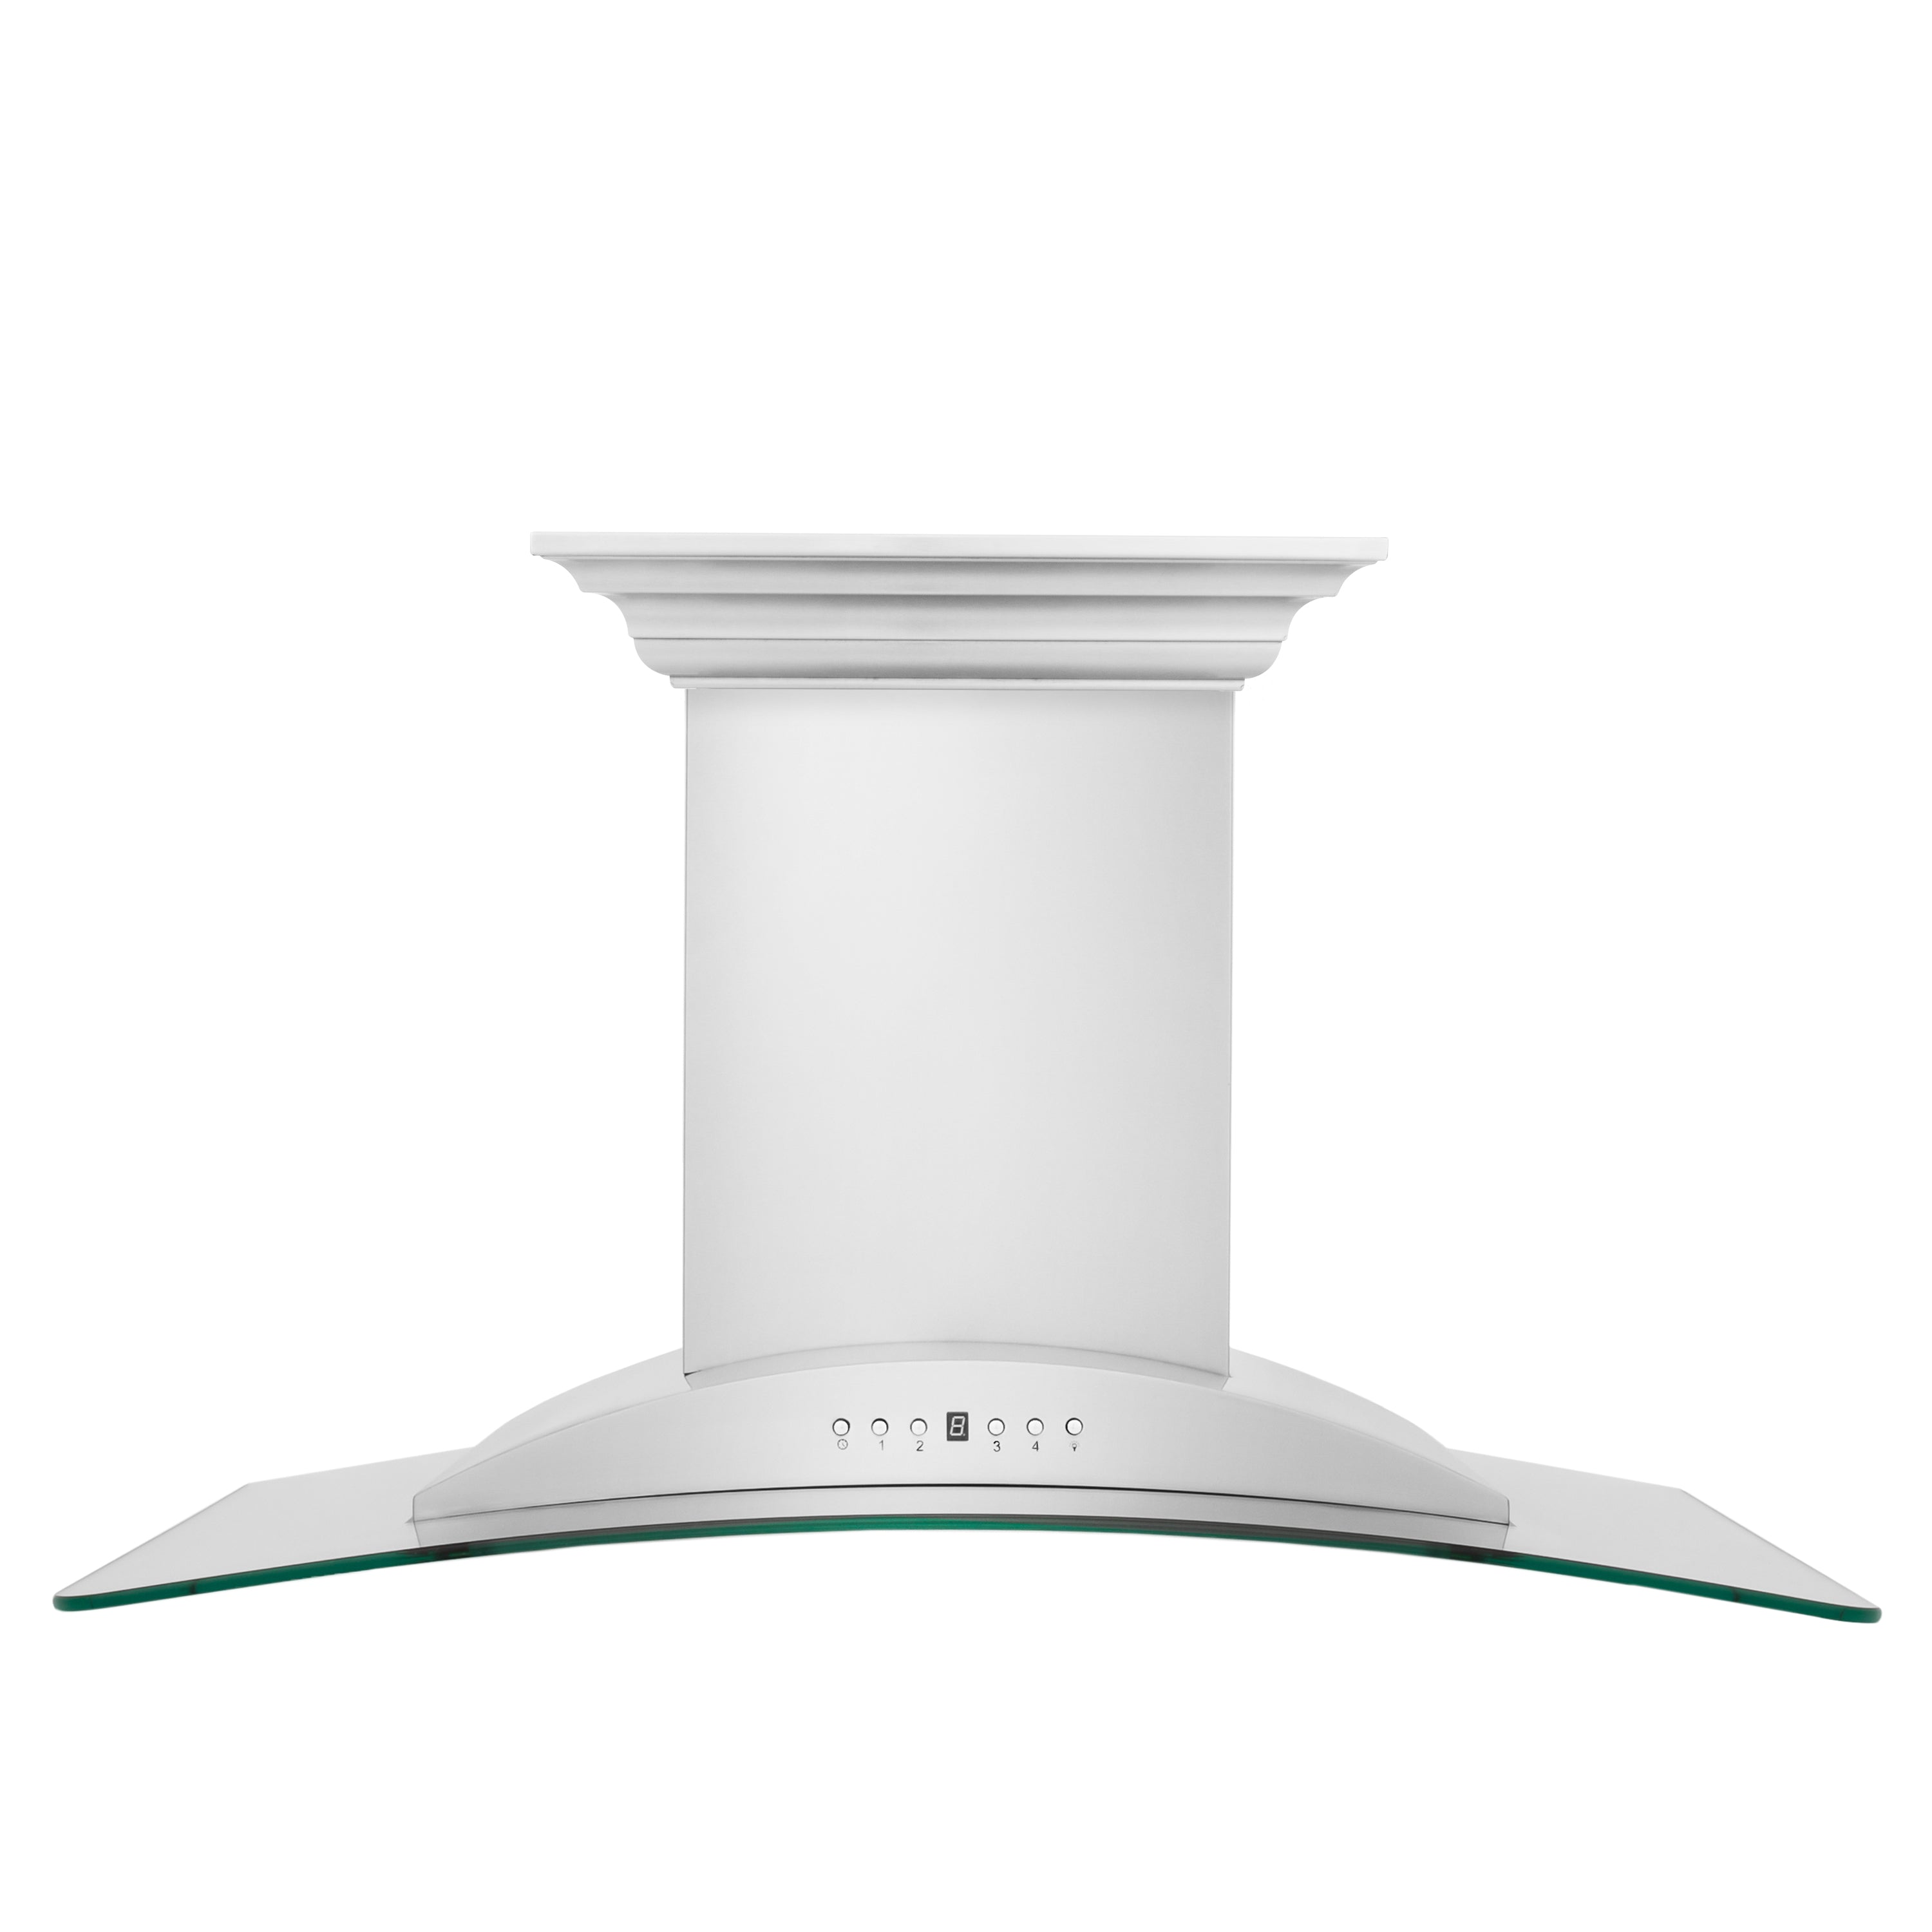 36" ZLINE CrownSound‚ Ducted Vent Wall Mount Range Hood in Stainless Steel with Built-in Bluetooth Speakers (KNCRN-BT-36)